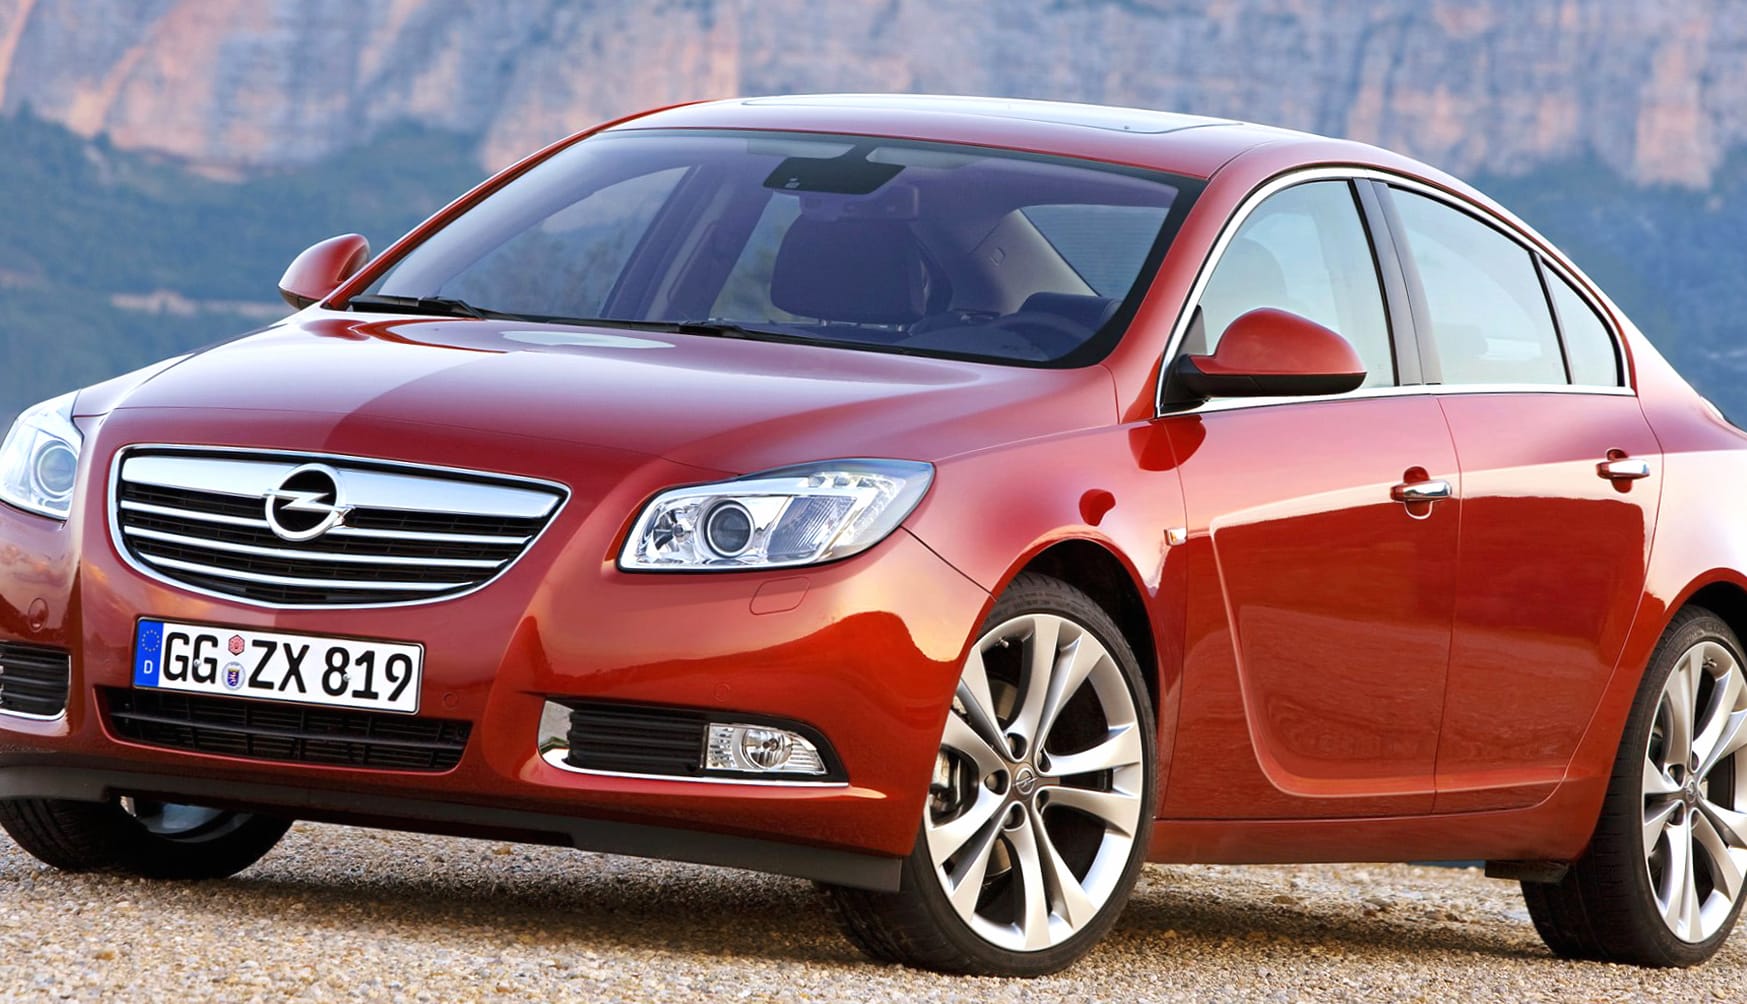 Opel Insignia Turbo wallpapers HD quality